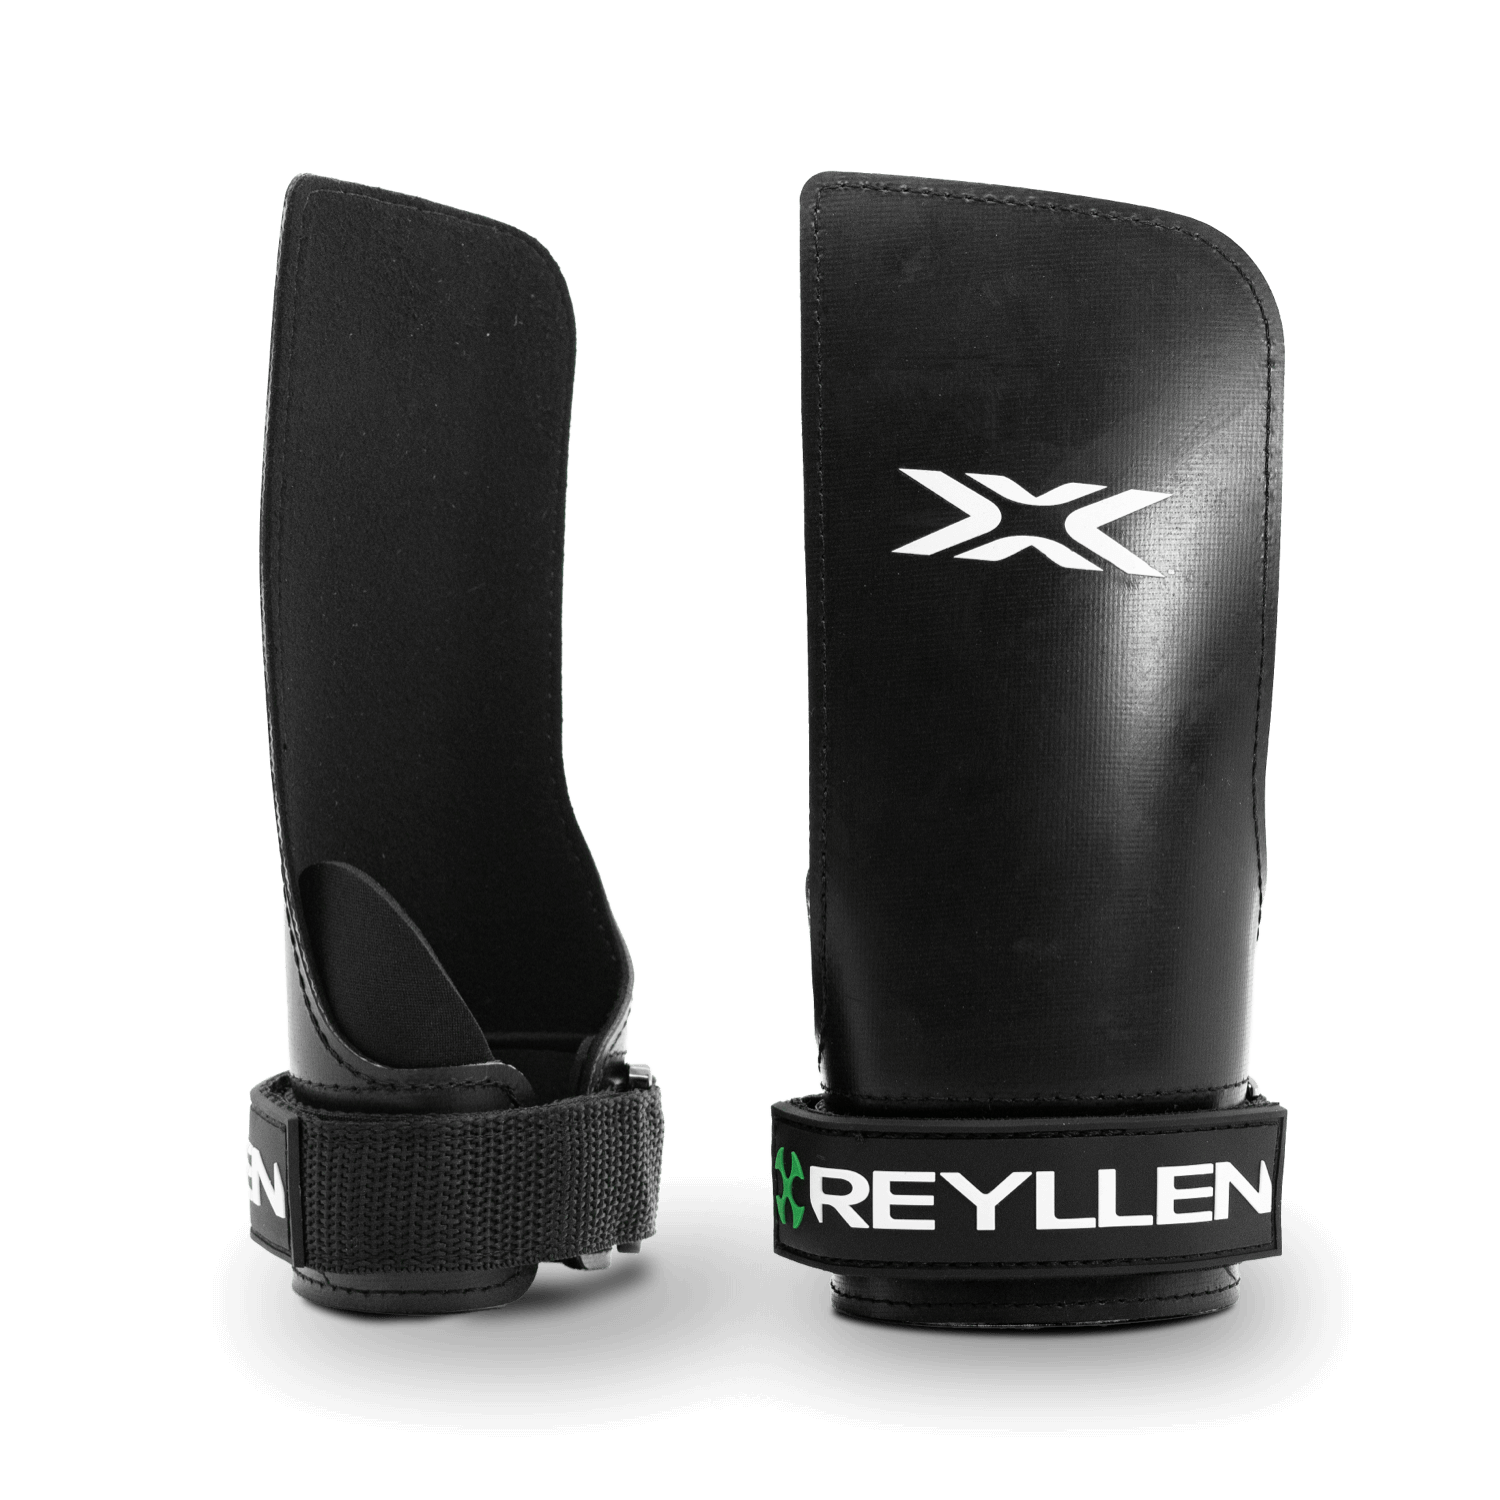 Seal X4 Fingerless Rubber Crossfit Gymnastic Hand Grips - Feature png image